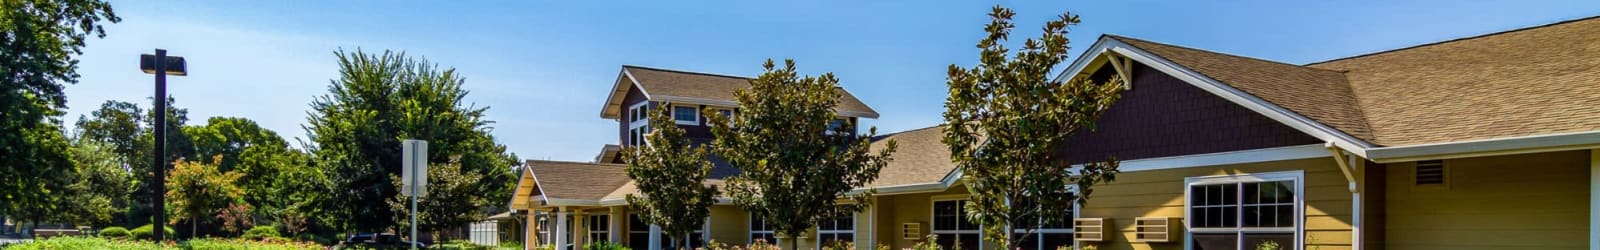 News and events at Amber Grove Place in Chico, California. 